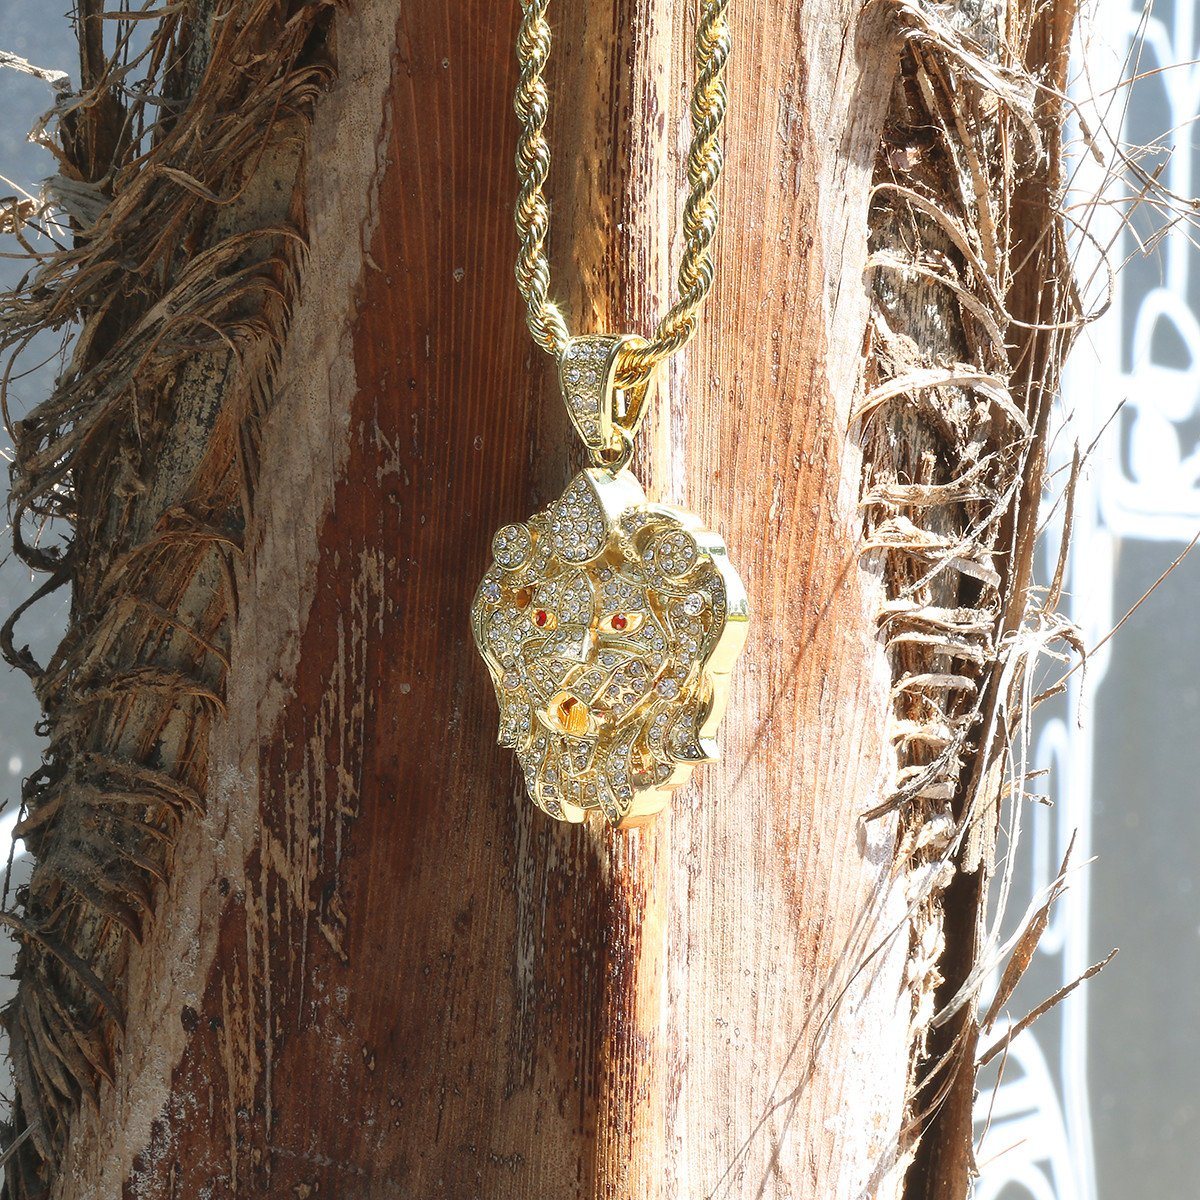 Gold Filled Lion Face Pendant with Rope Chain